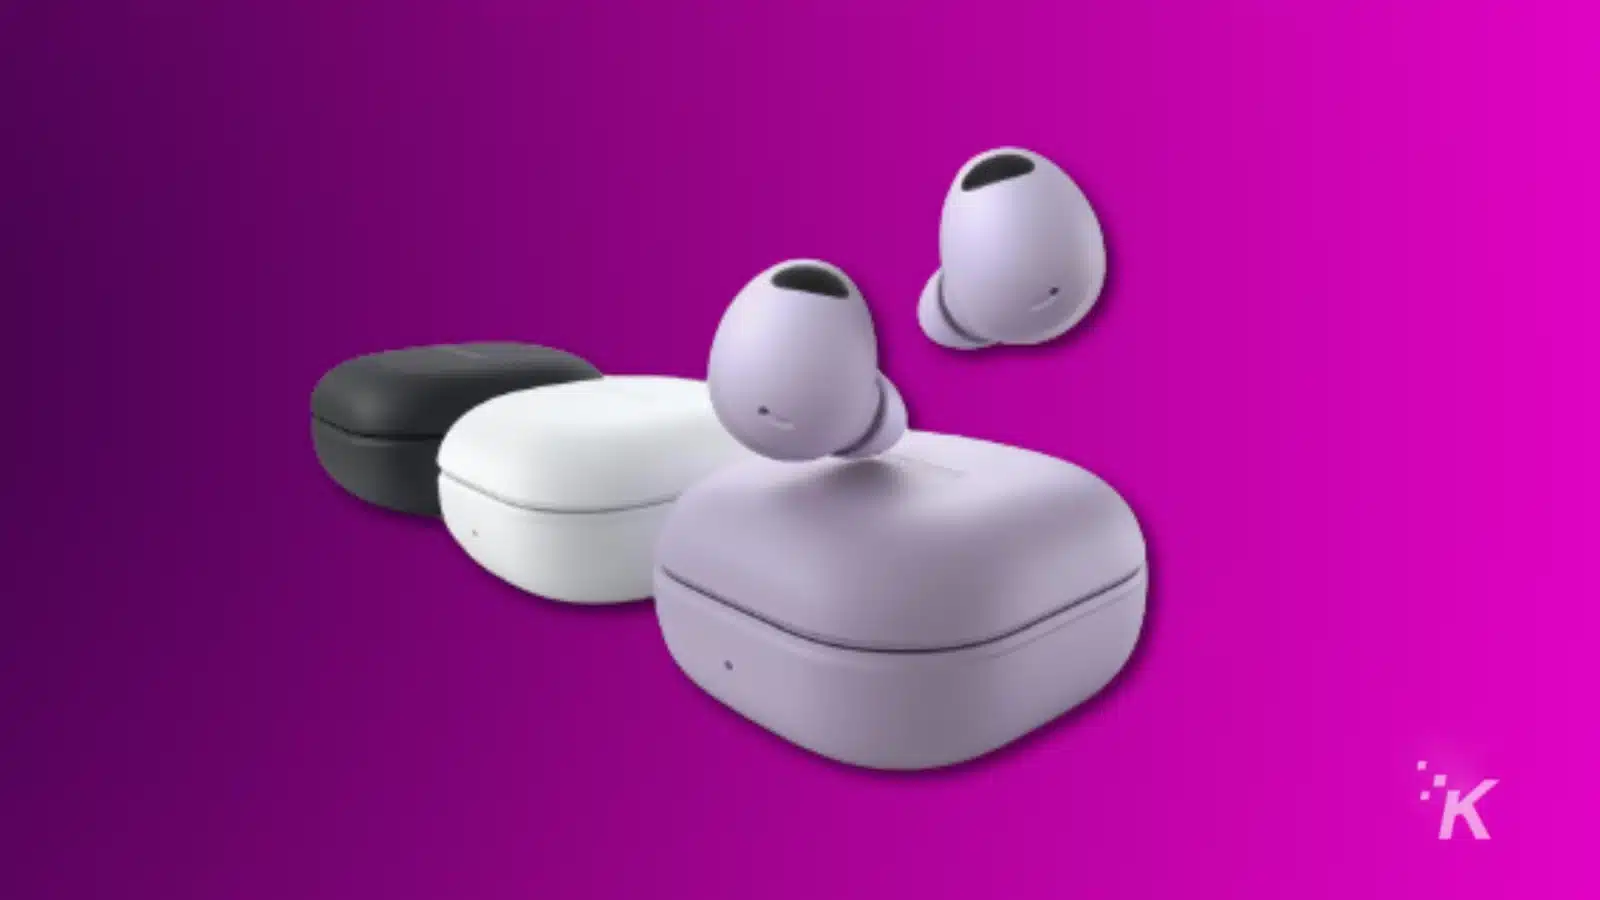 Galaxy buds pro 2 in black, white and purple colors